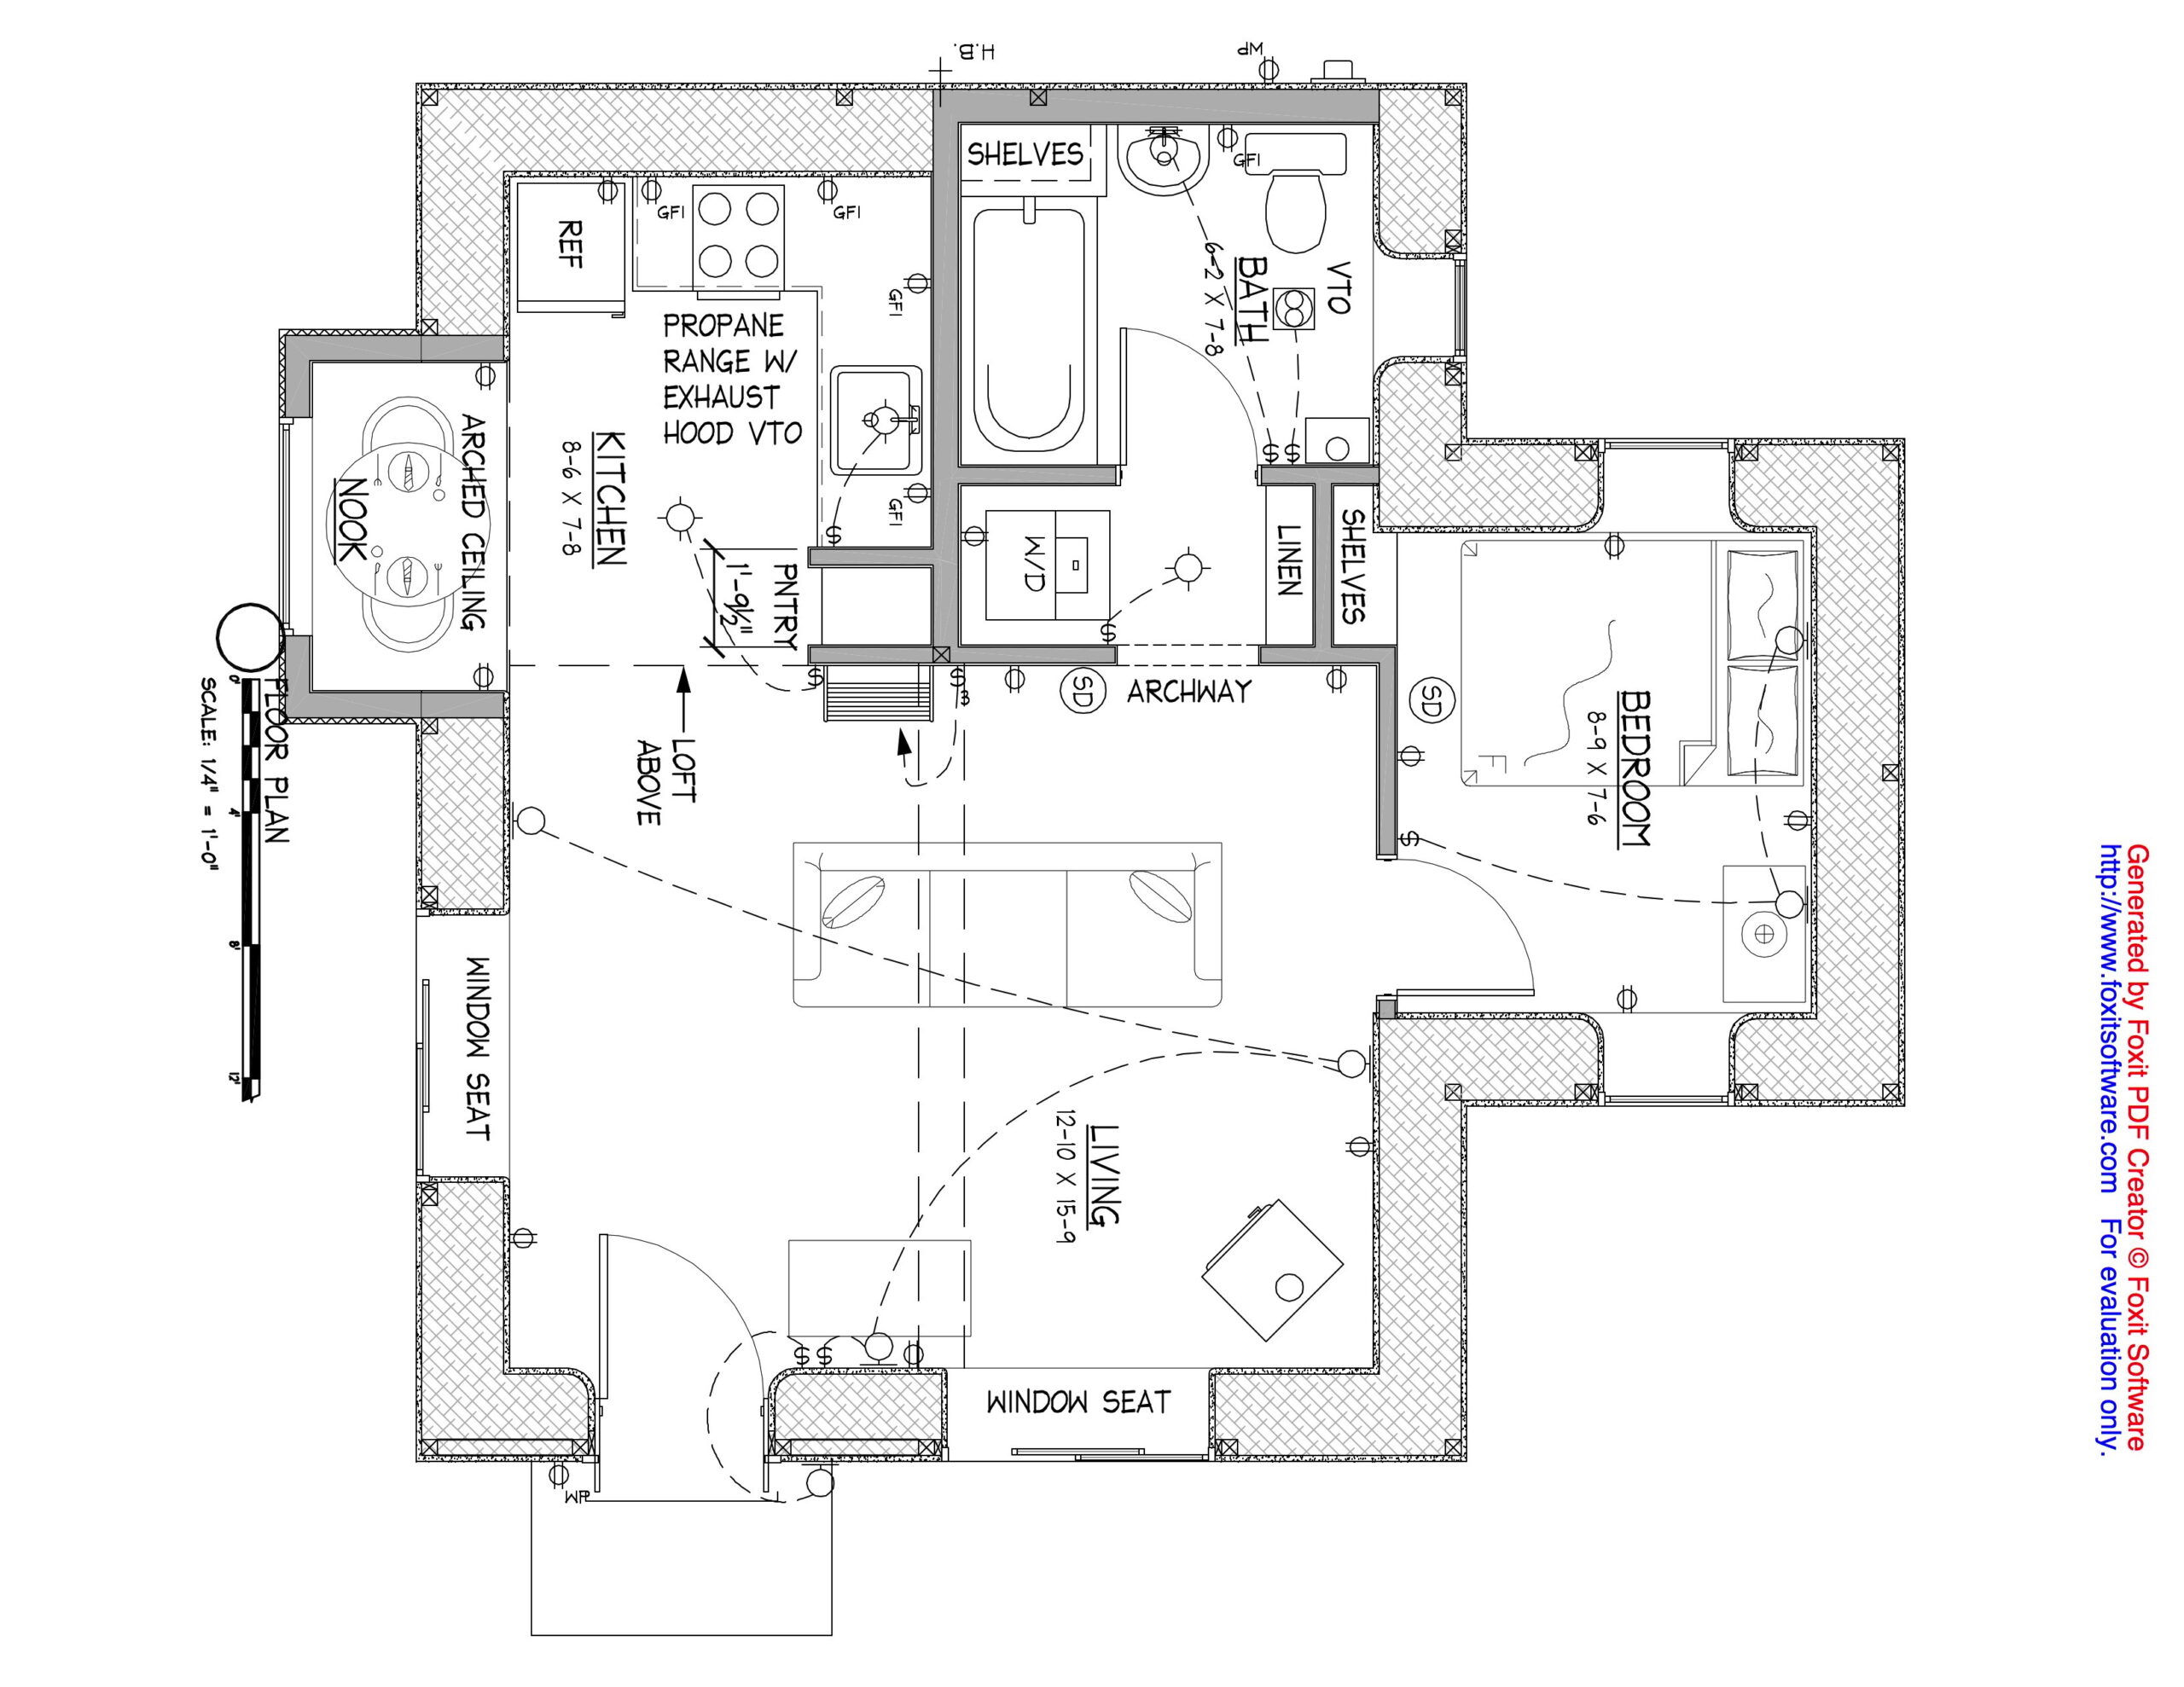 What is the importance of having floor plans?